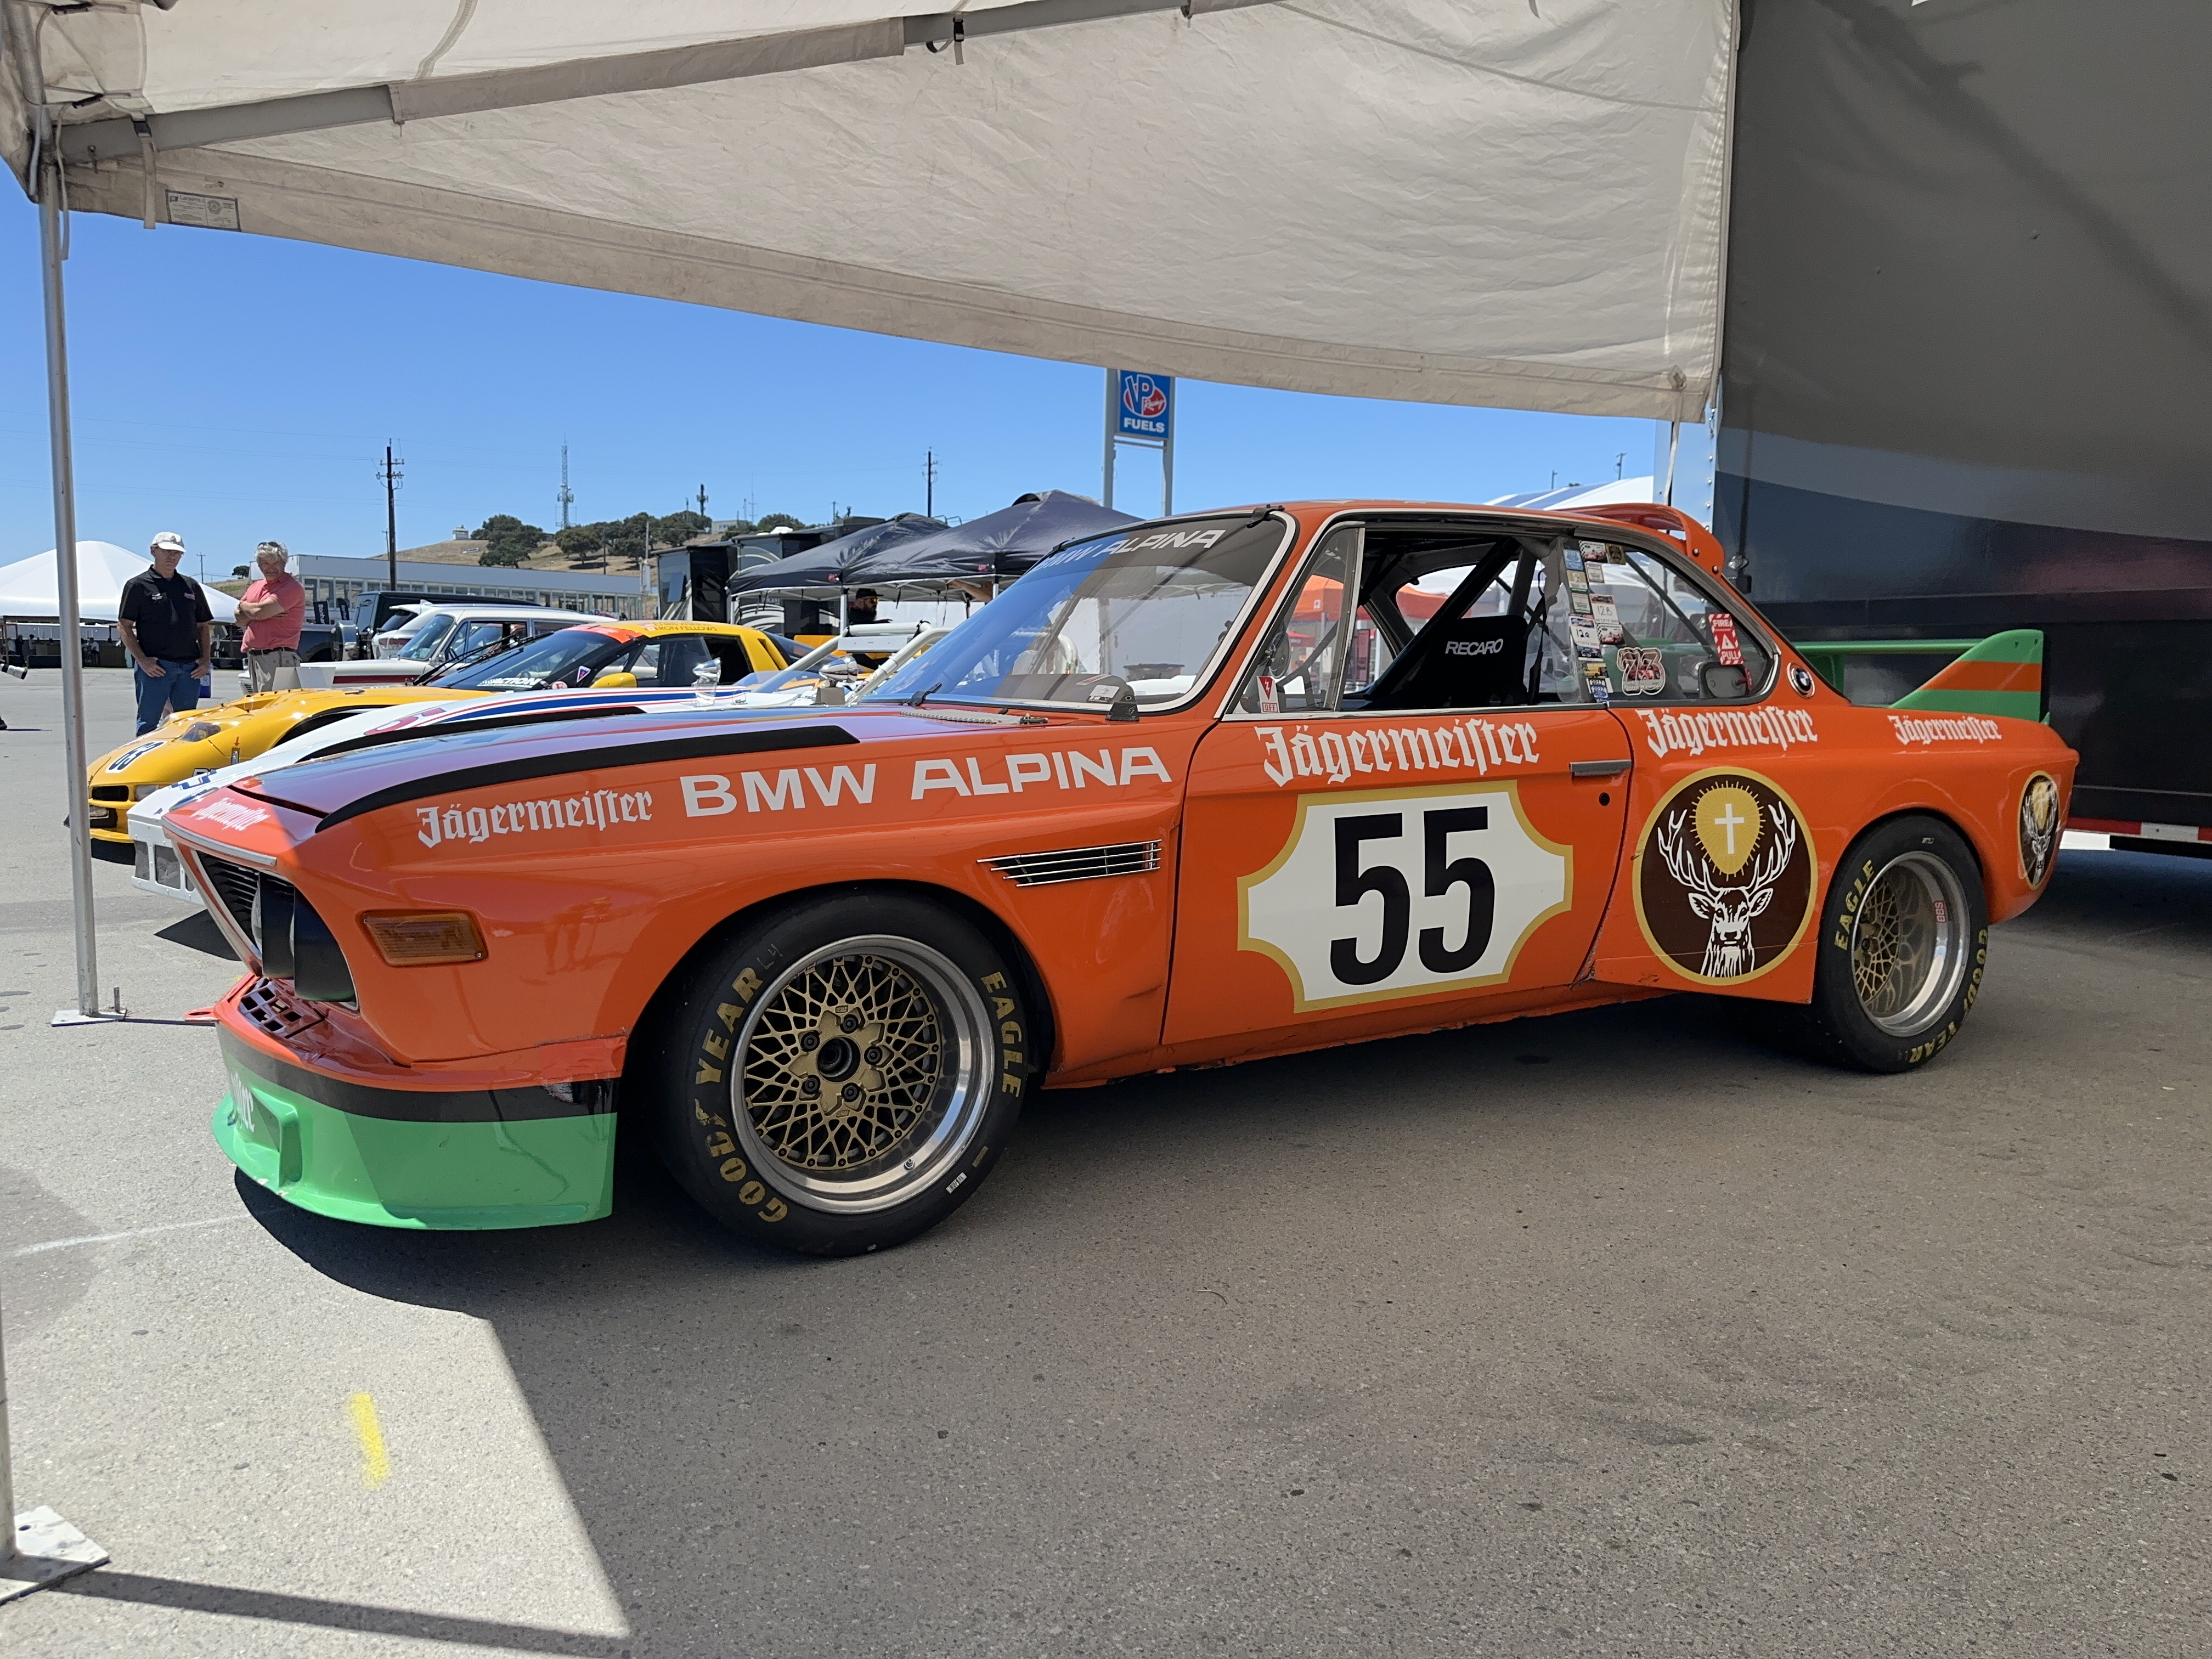 A BMW Alpina CSL race car in a very striking orange and green Jäegermeister livery